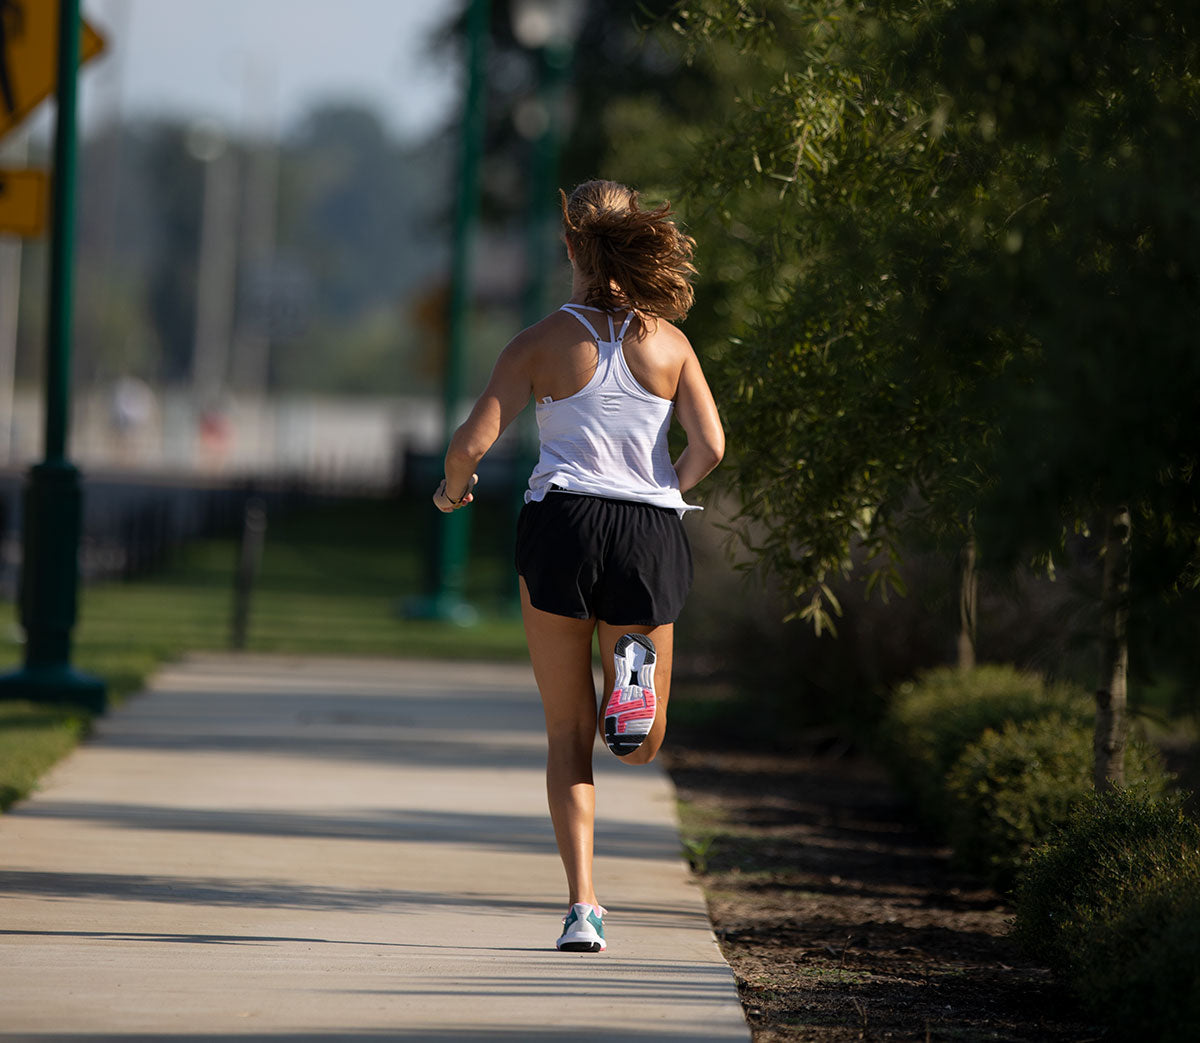 RUNNING TIPS TO KEEP YOU MOVING